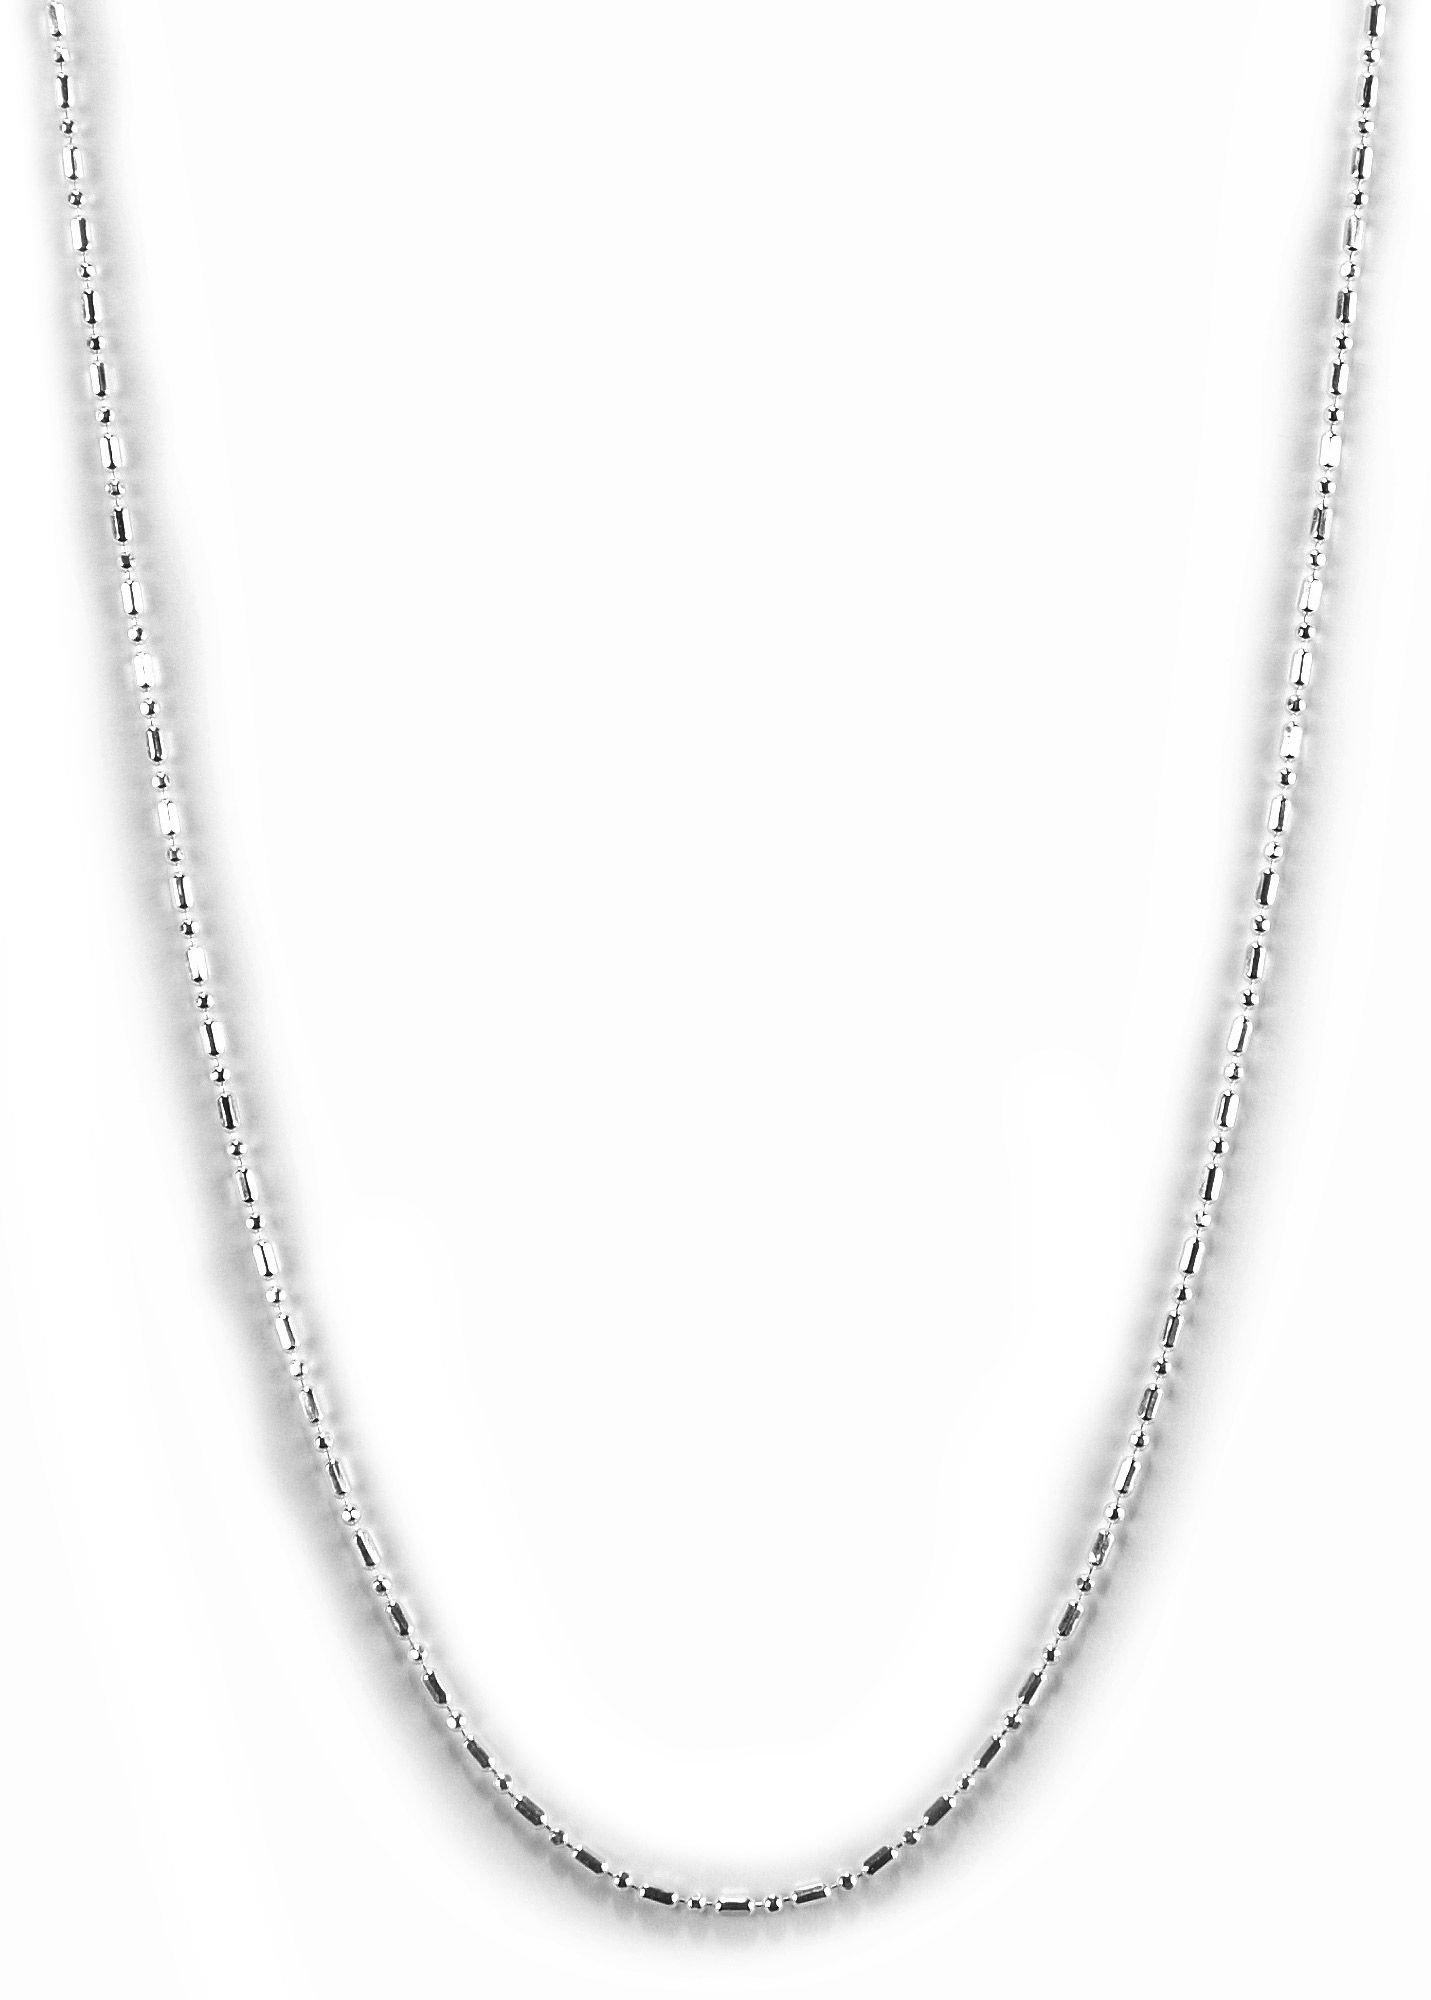 Piper & Taylor Silver Tone Dashed Chain Necklace